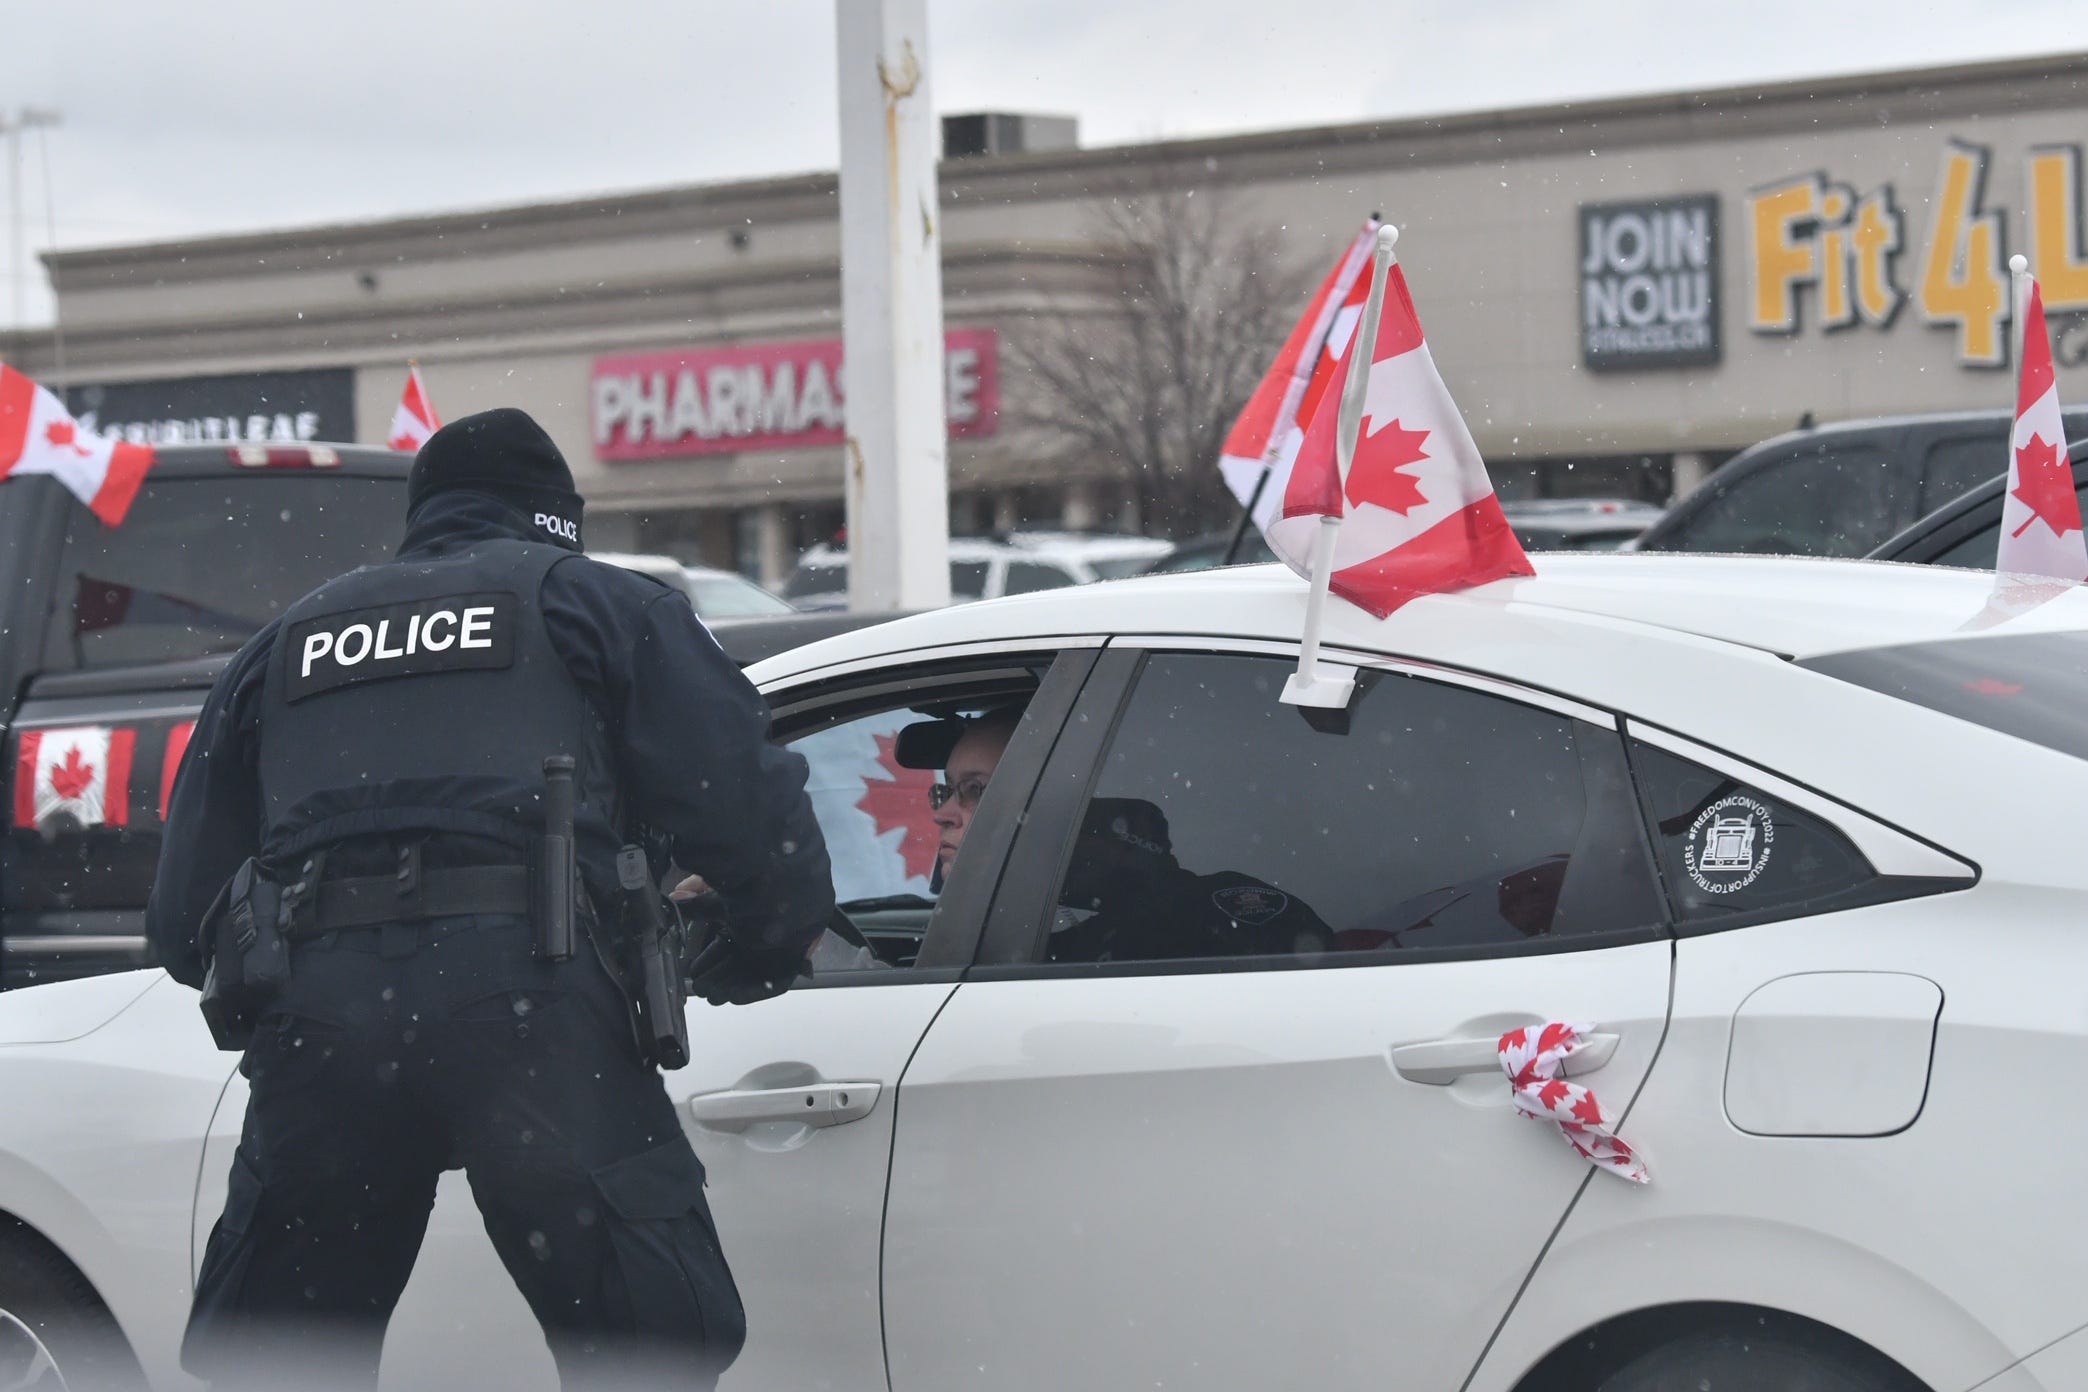 Windsor and London Police officers inform people parked in a shopping area parking lot on Huron Church Road that they cannot stay parked unless they are using the businesses and will be towed. This is not far from Ambassador Bridge in Windsor, Ontario, on Feb. 13, 2022.